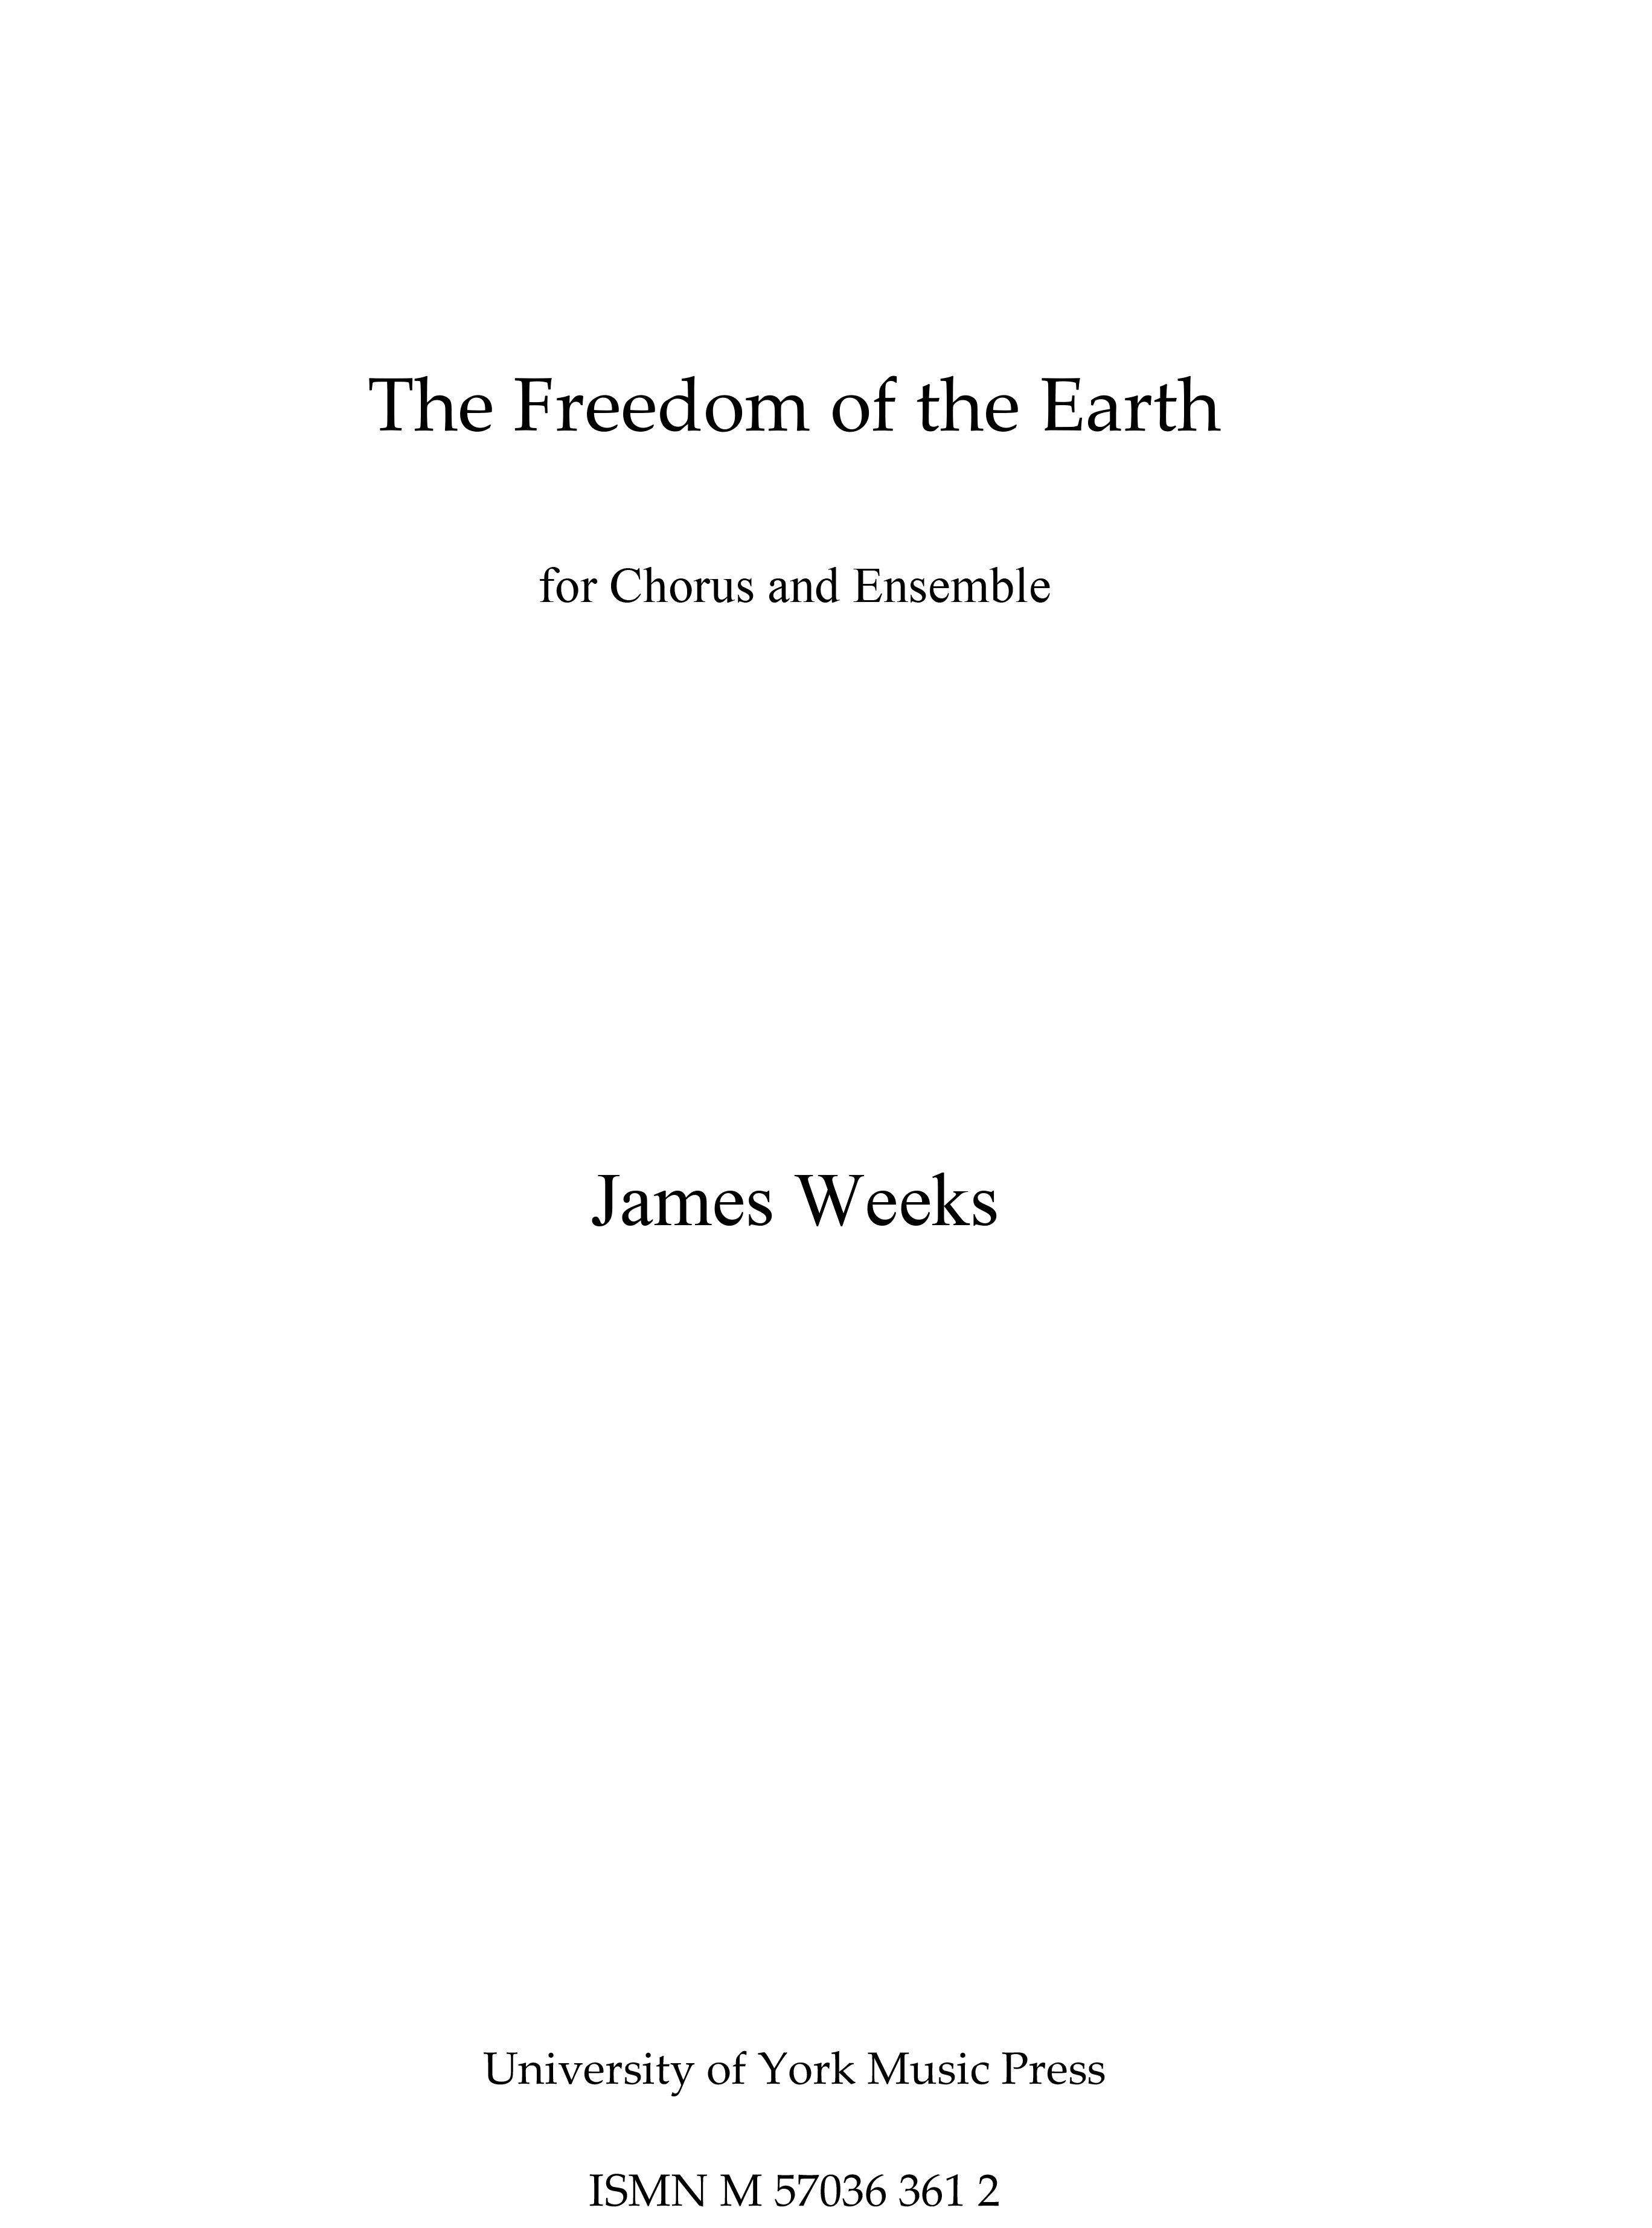 James Weeks: The Freedom of the Earth: SATB: Score